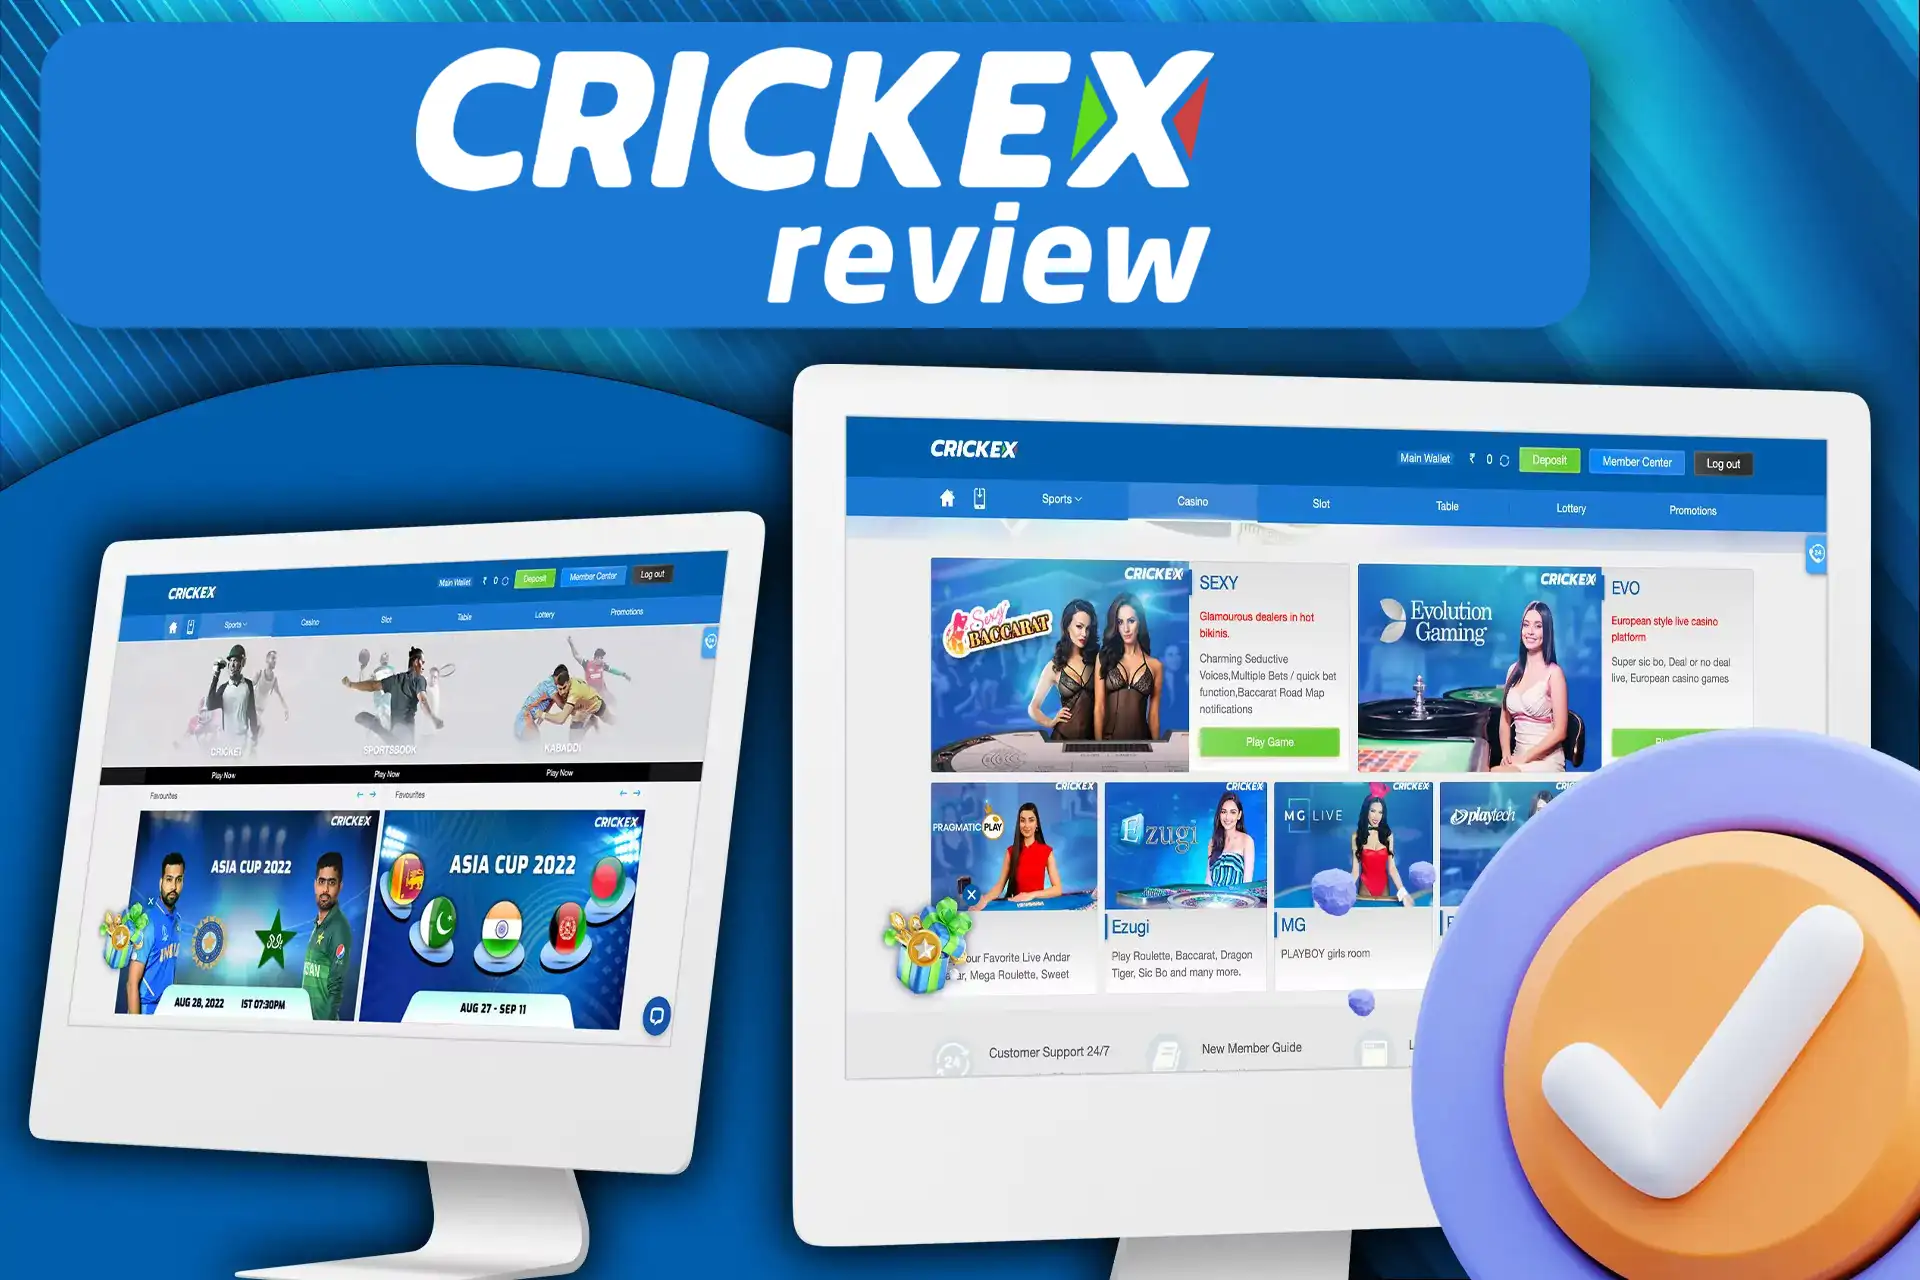 You will find bettin options as well as casino games on the Crickex website.